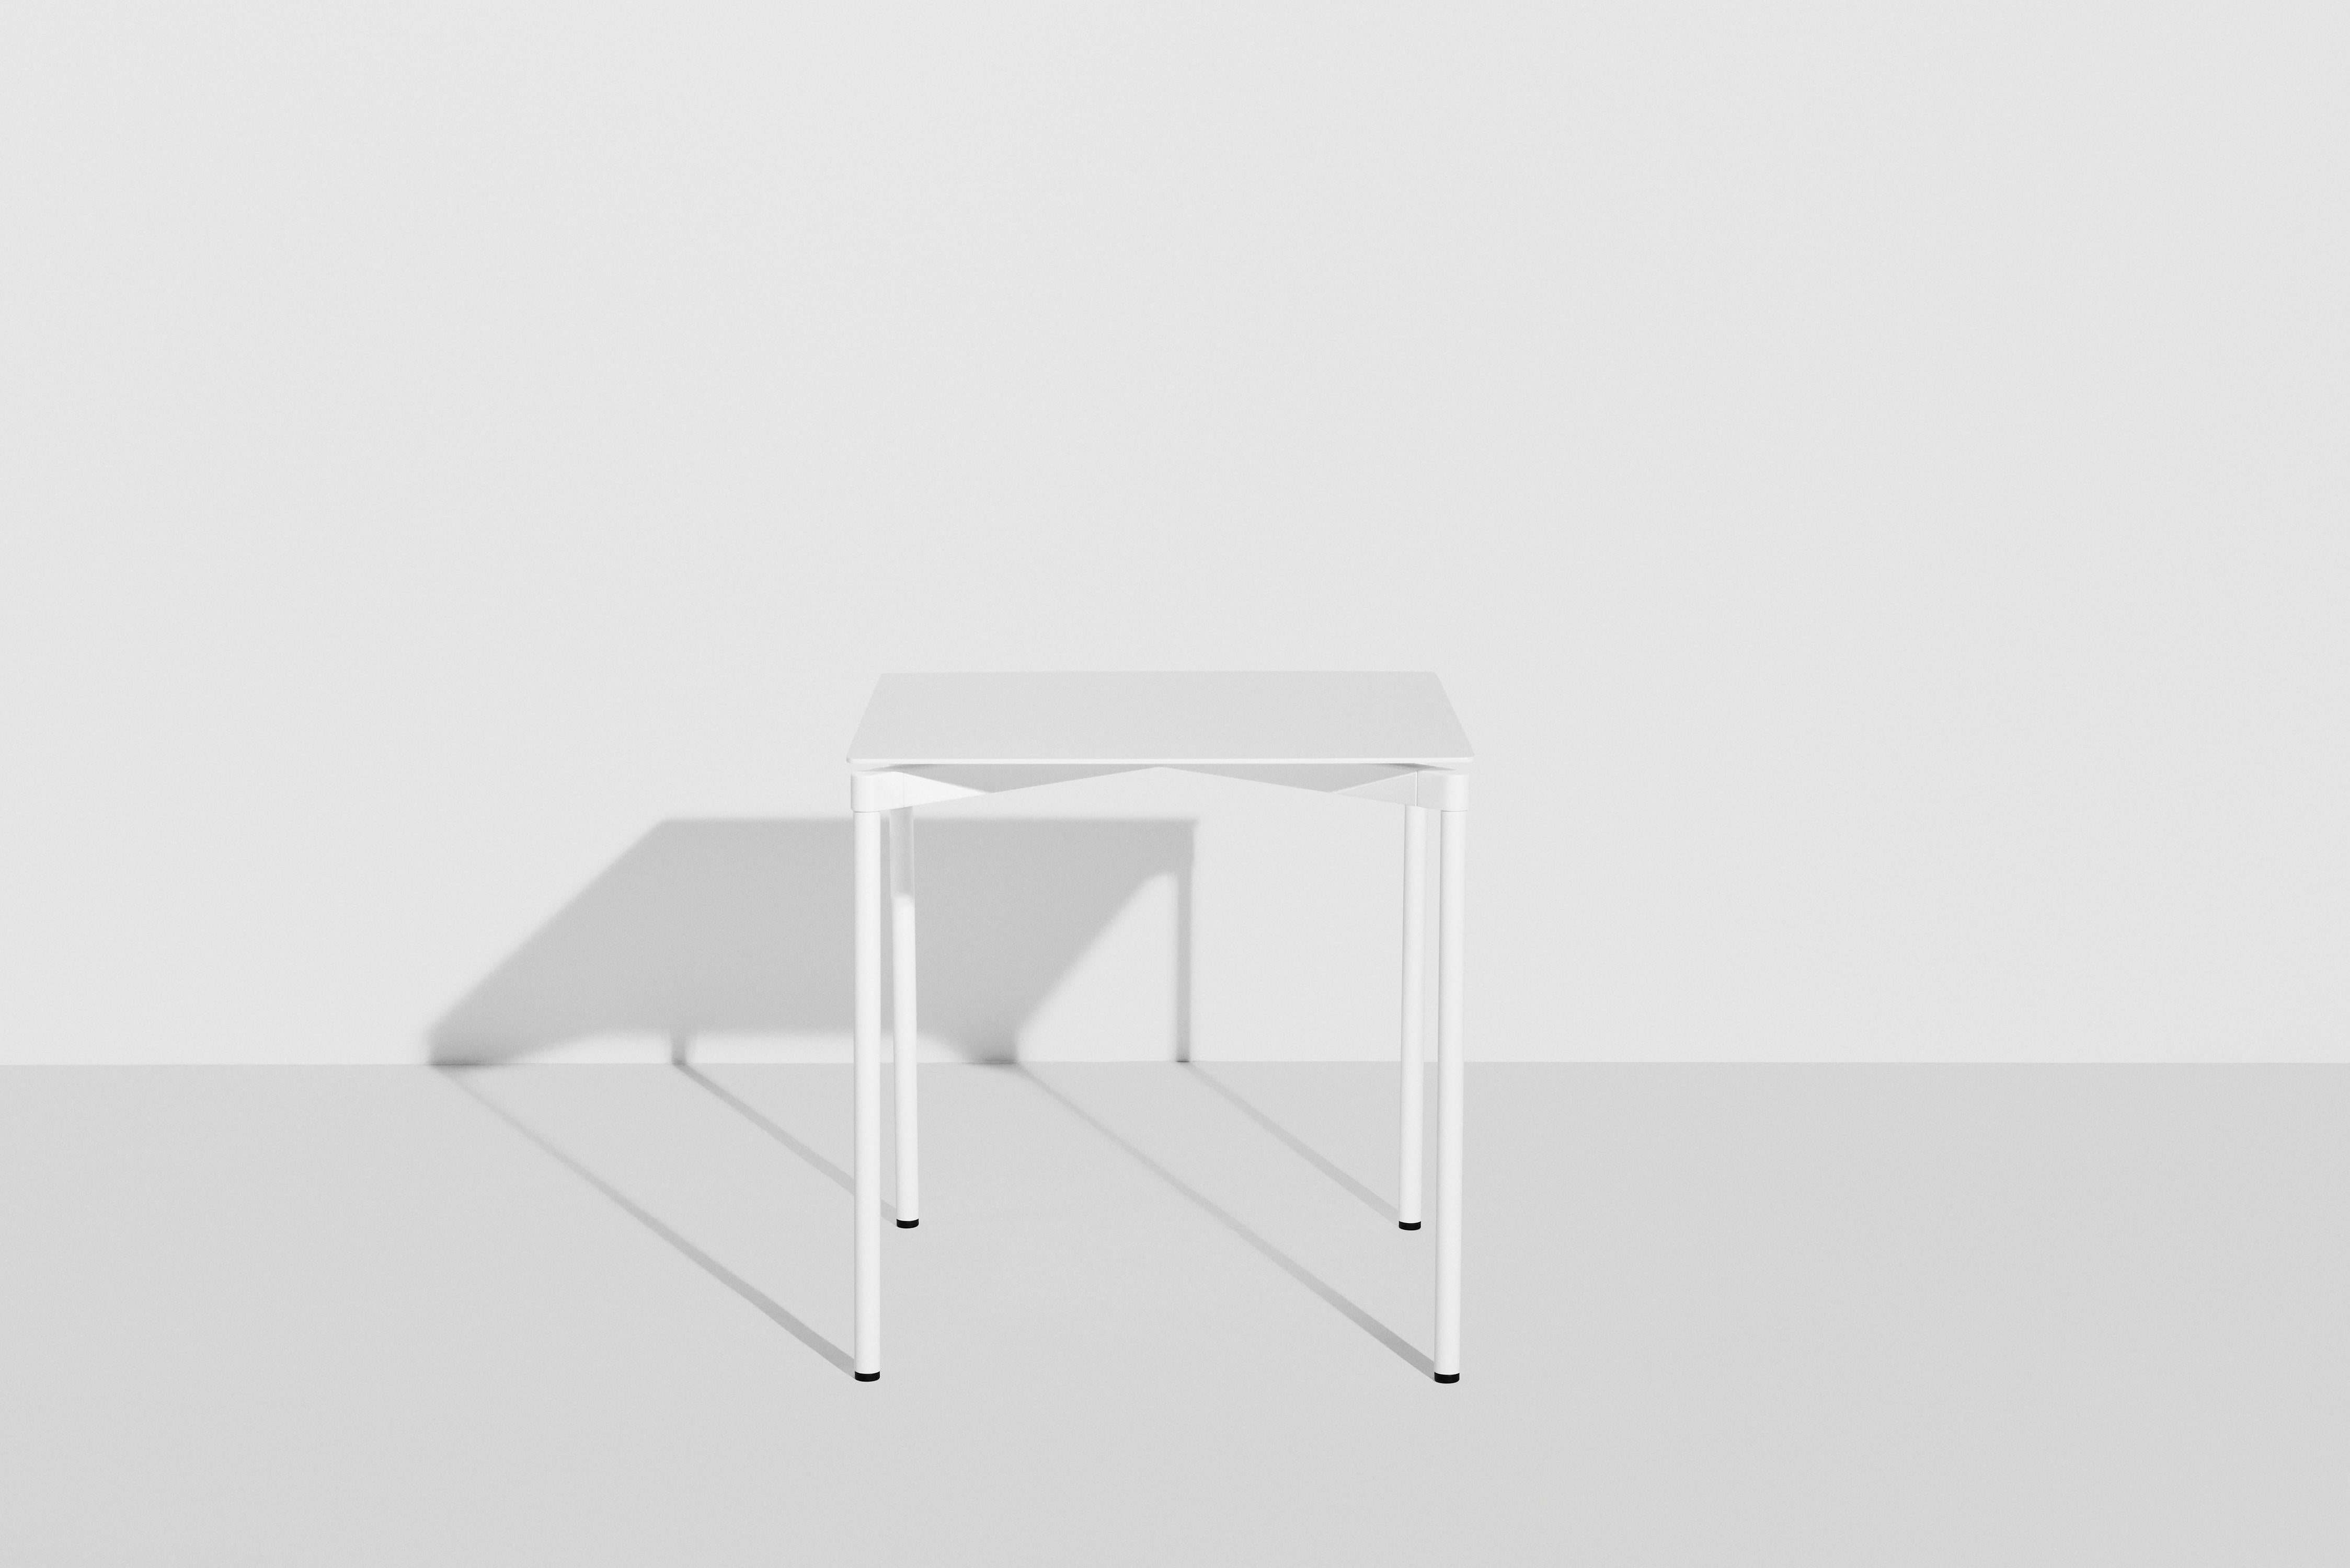 Petite Friture Fromme Square Table in White Aluminium by Tom Chung, 2020

The Fromme collection stands out by its pure line and compact design. Absorbers placed under the seating gives a soft and very comfortable flexibility to seats. Made from